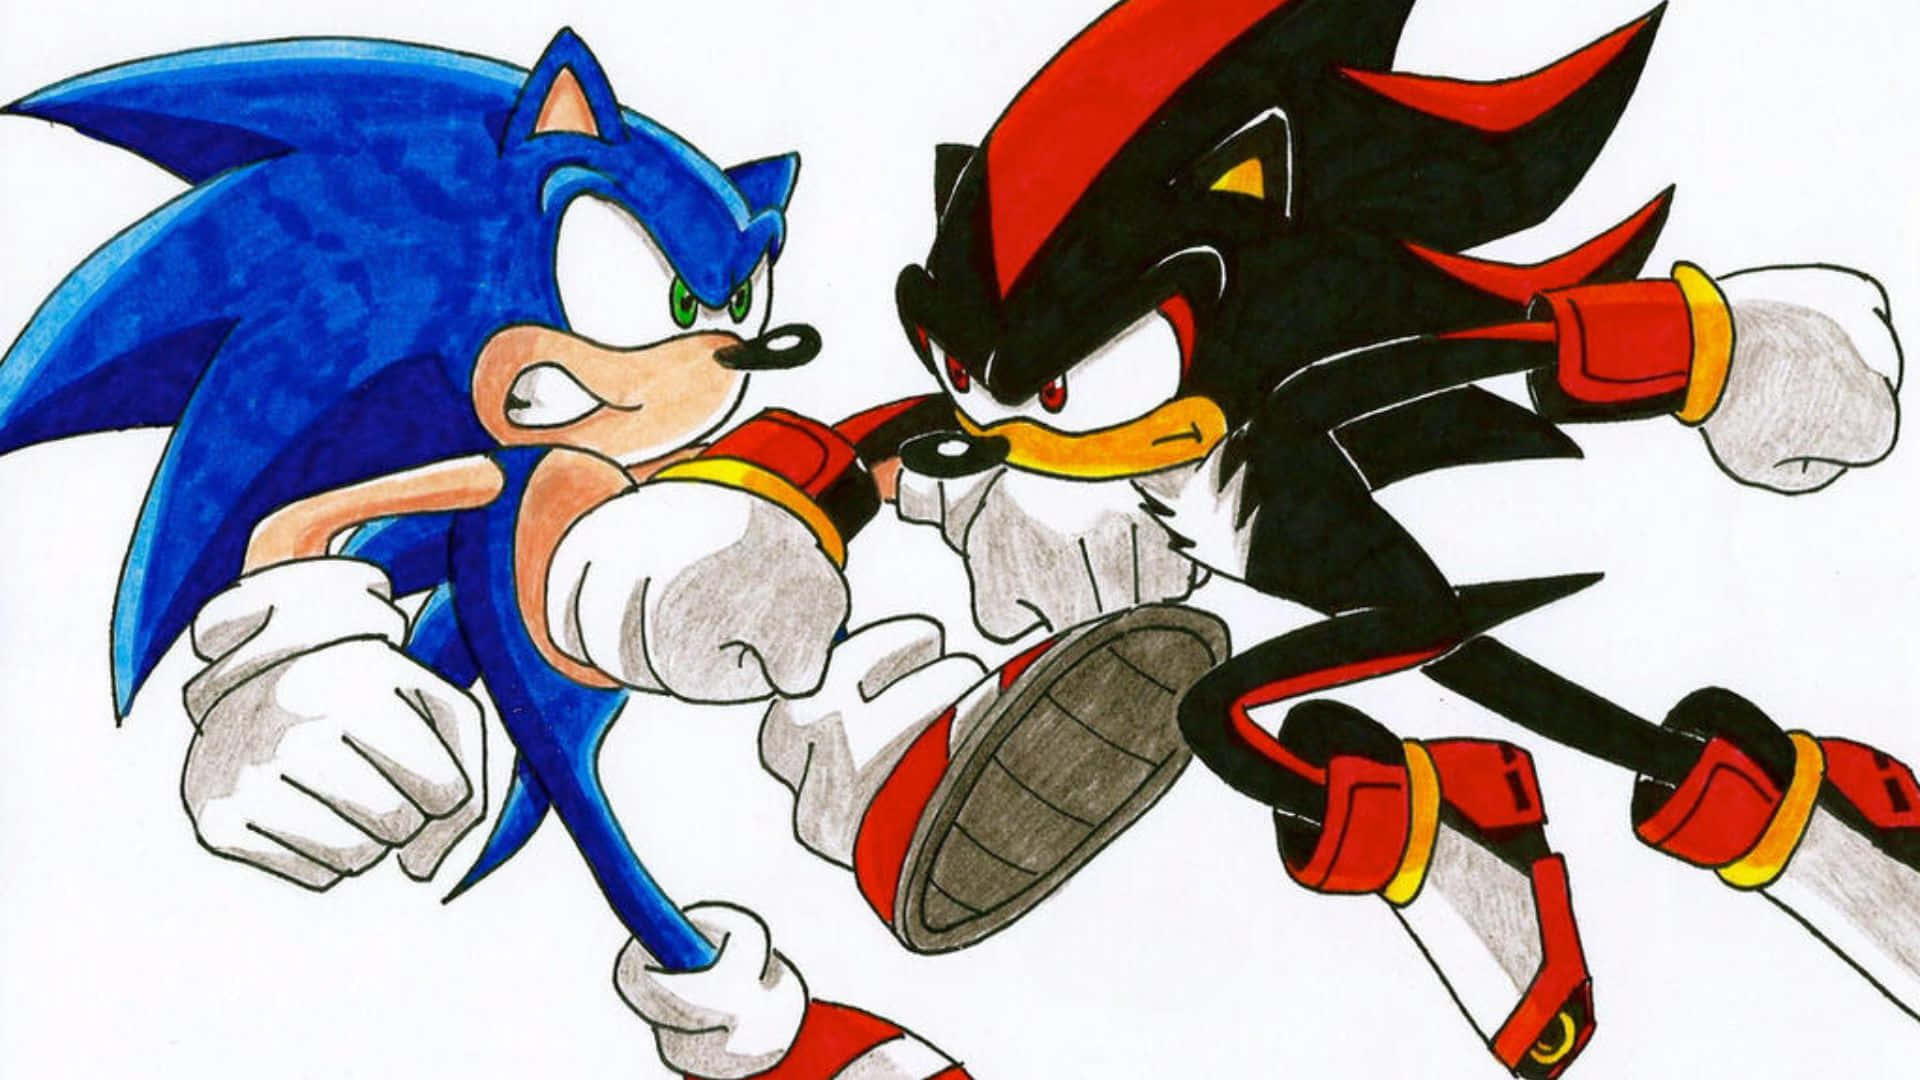 Sonic and Shadow together in an epic gaming adventure Wallpaper